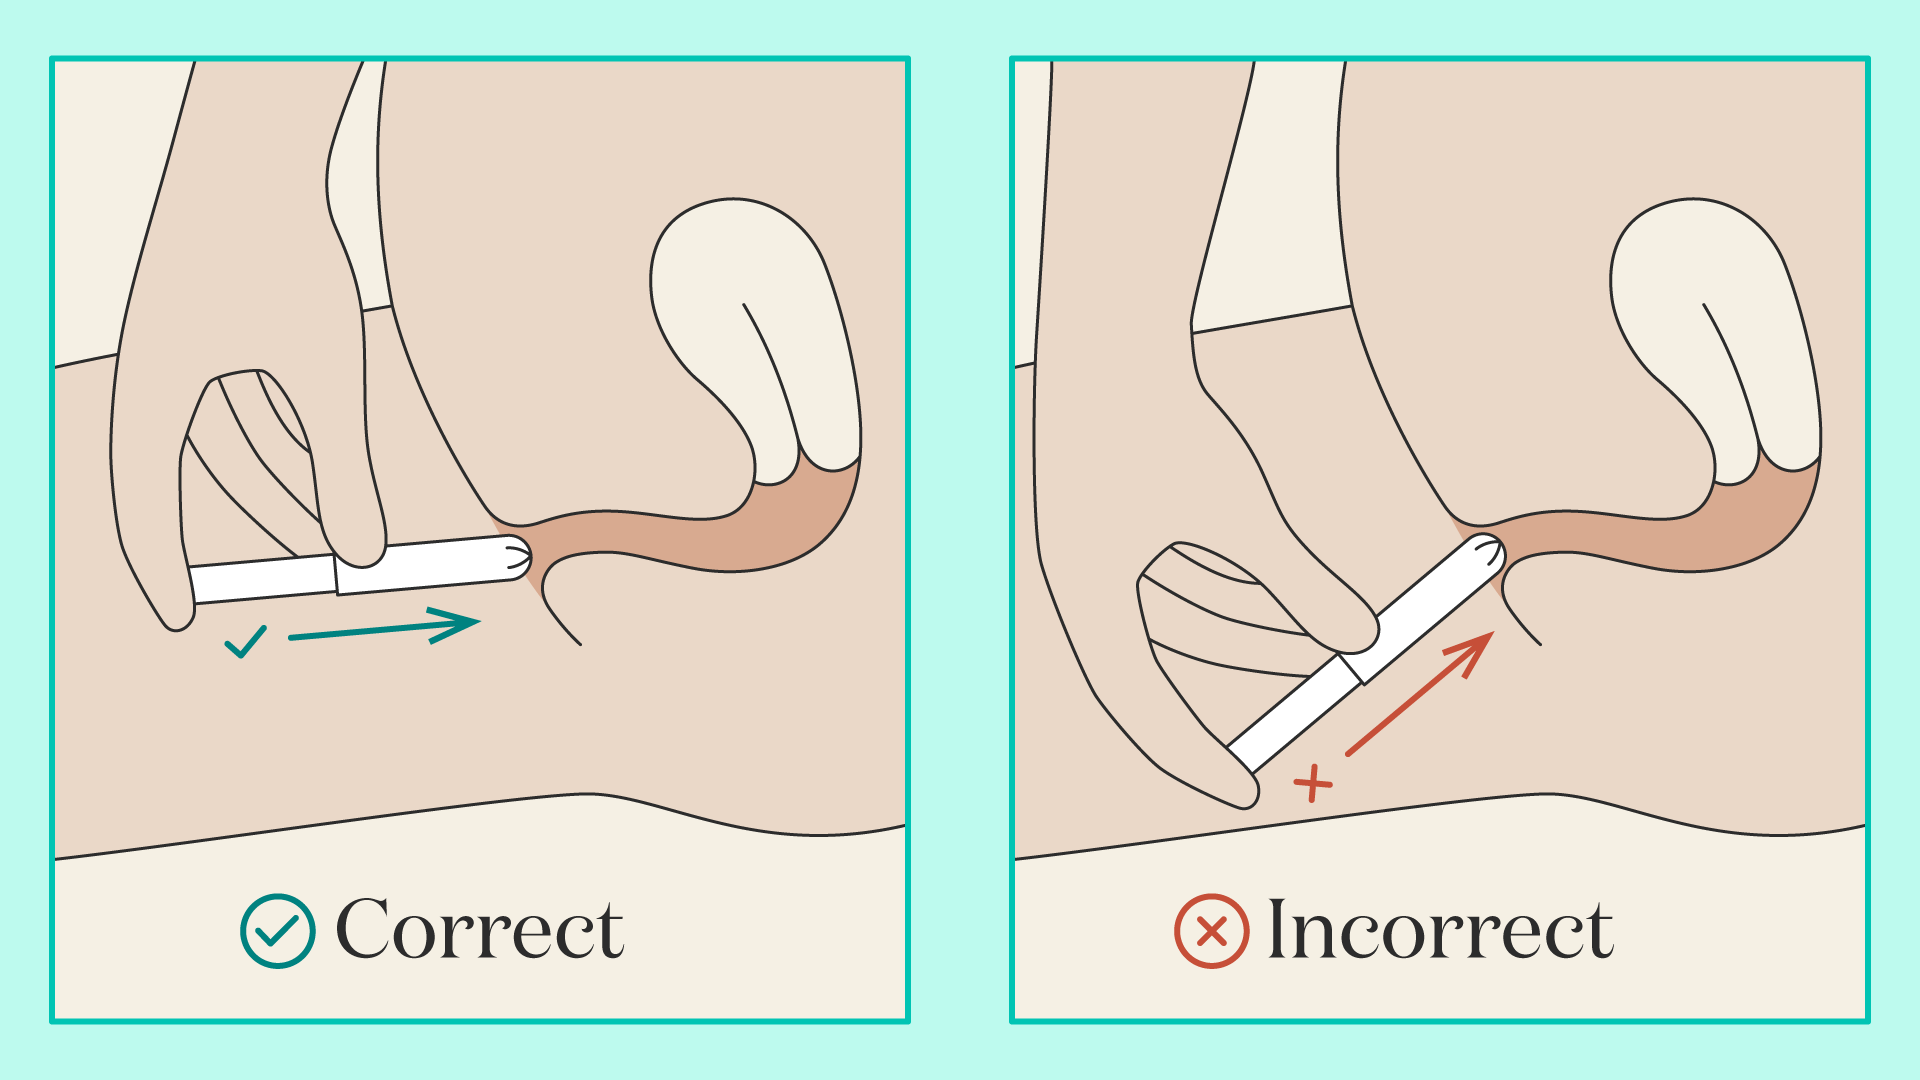 A diagram showing how to correctly insert a tampon